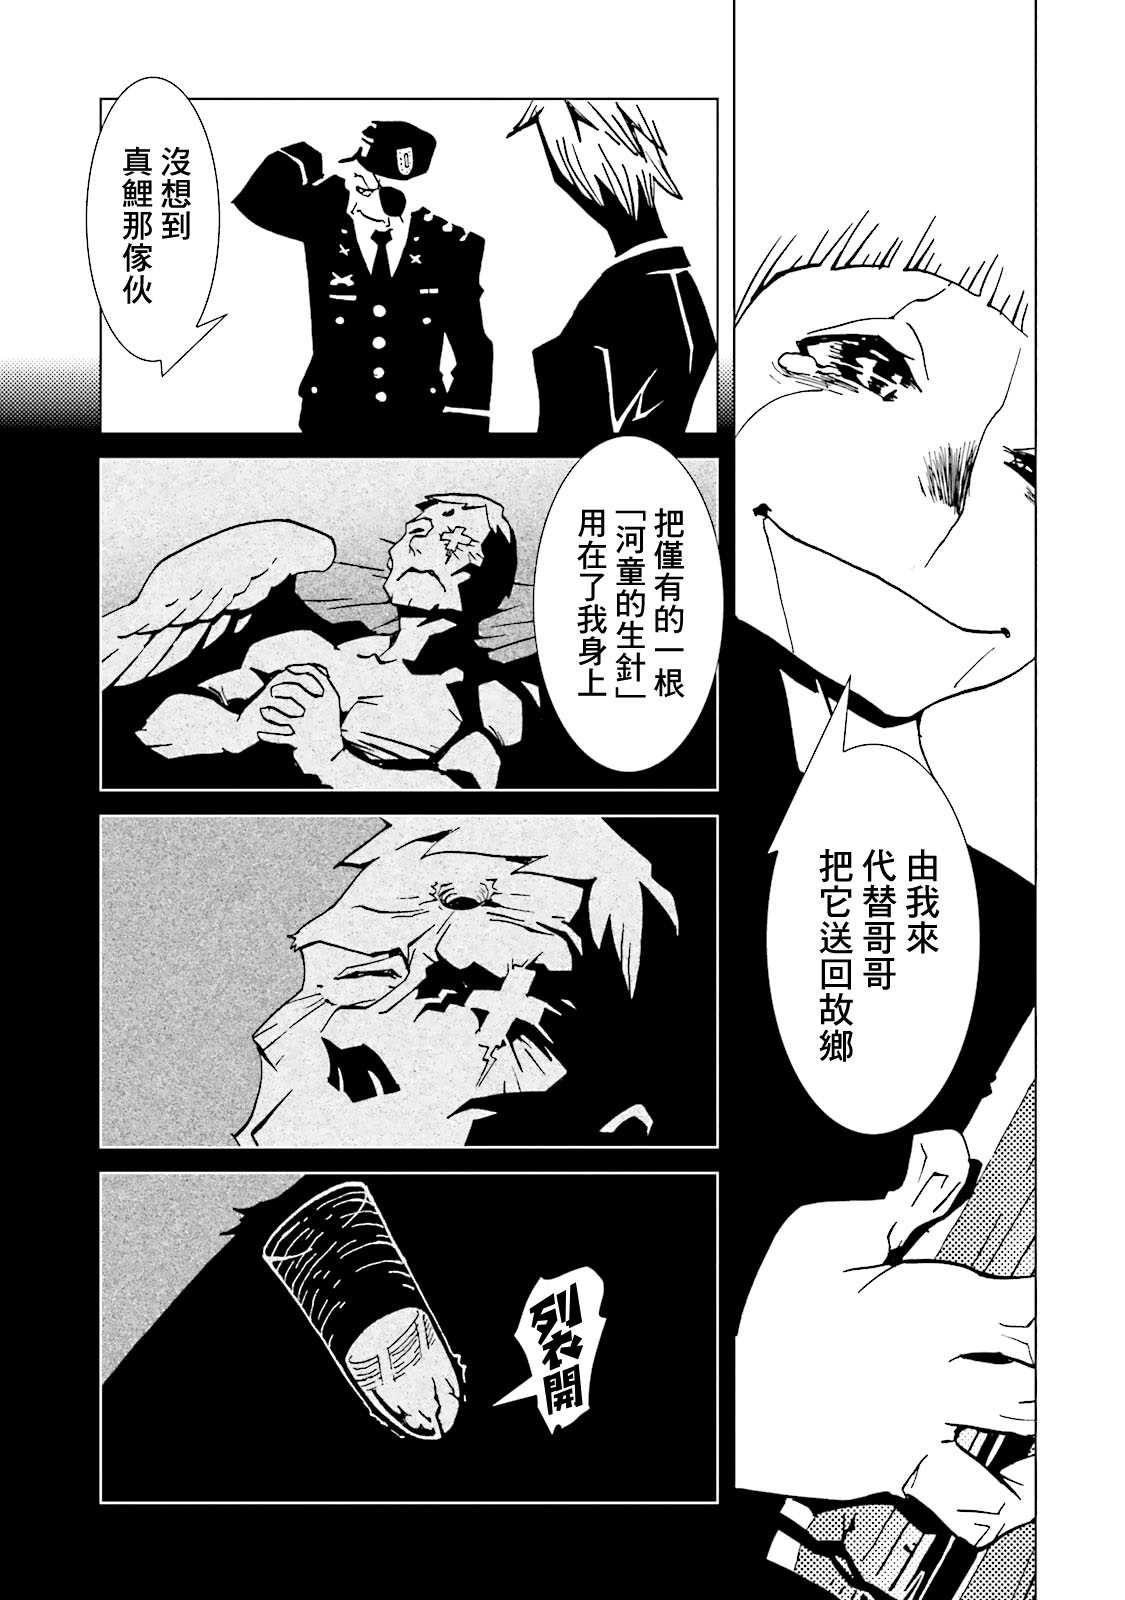 AREA51 - 第66話 - 1